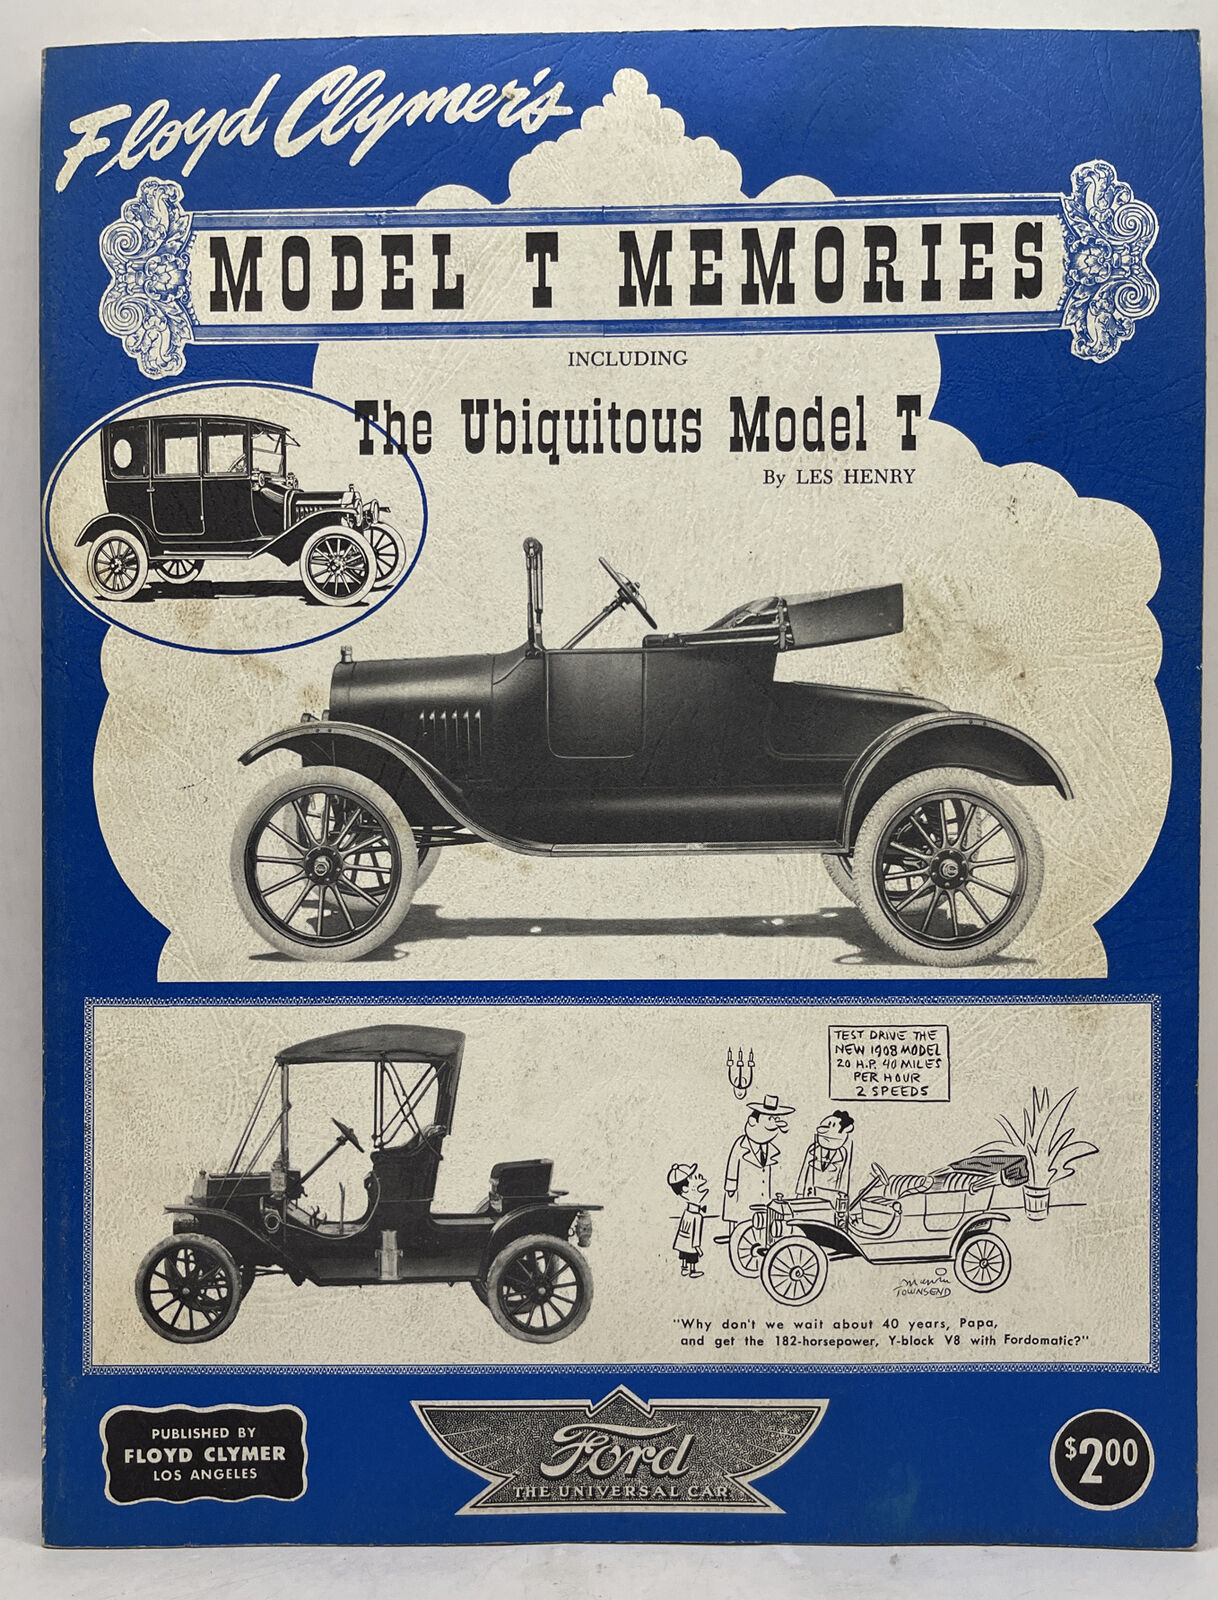 Floyd Clymer's Model T Memories Including The Ubiquitous Model T by Les Henry